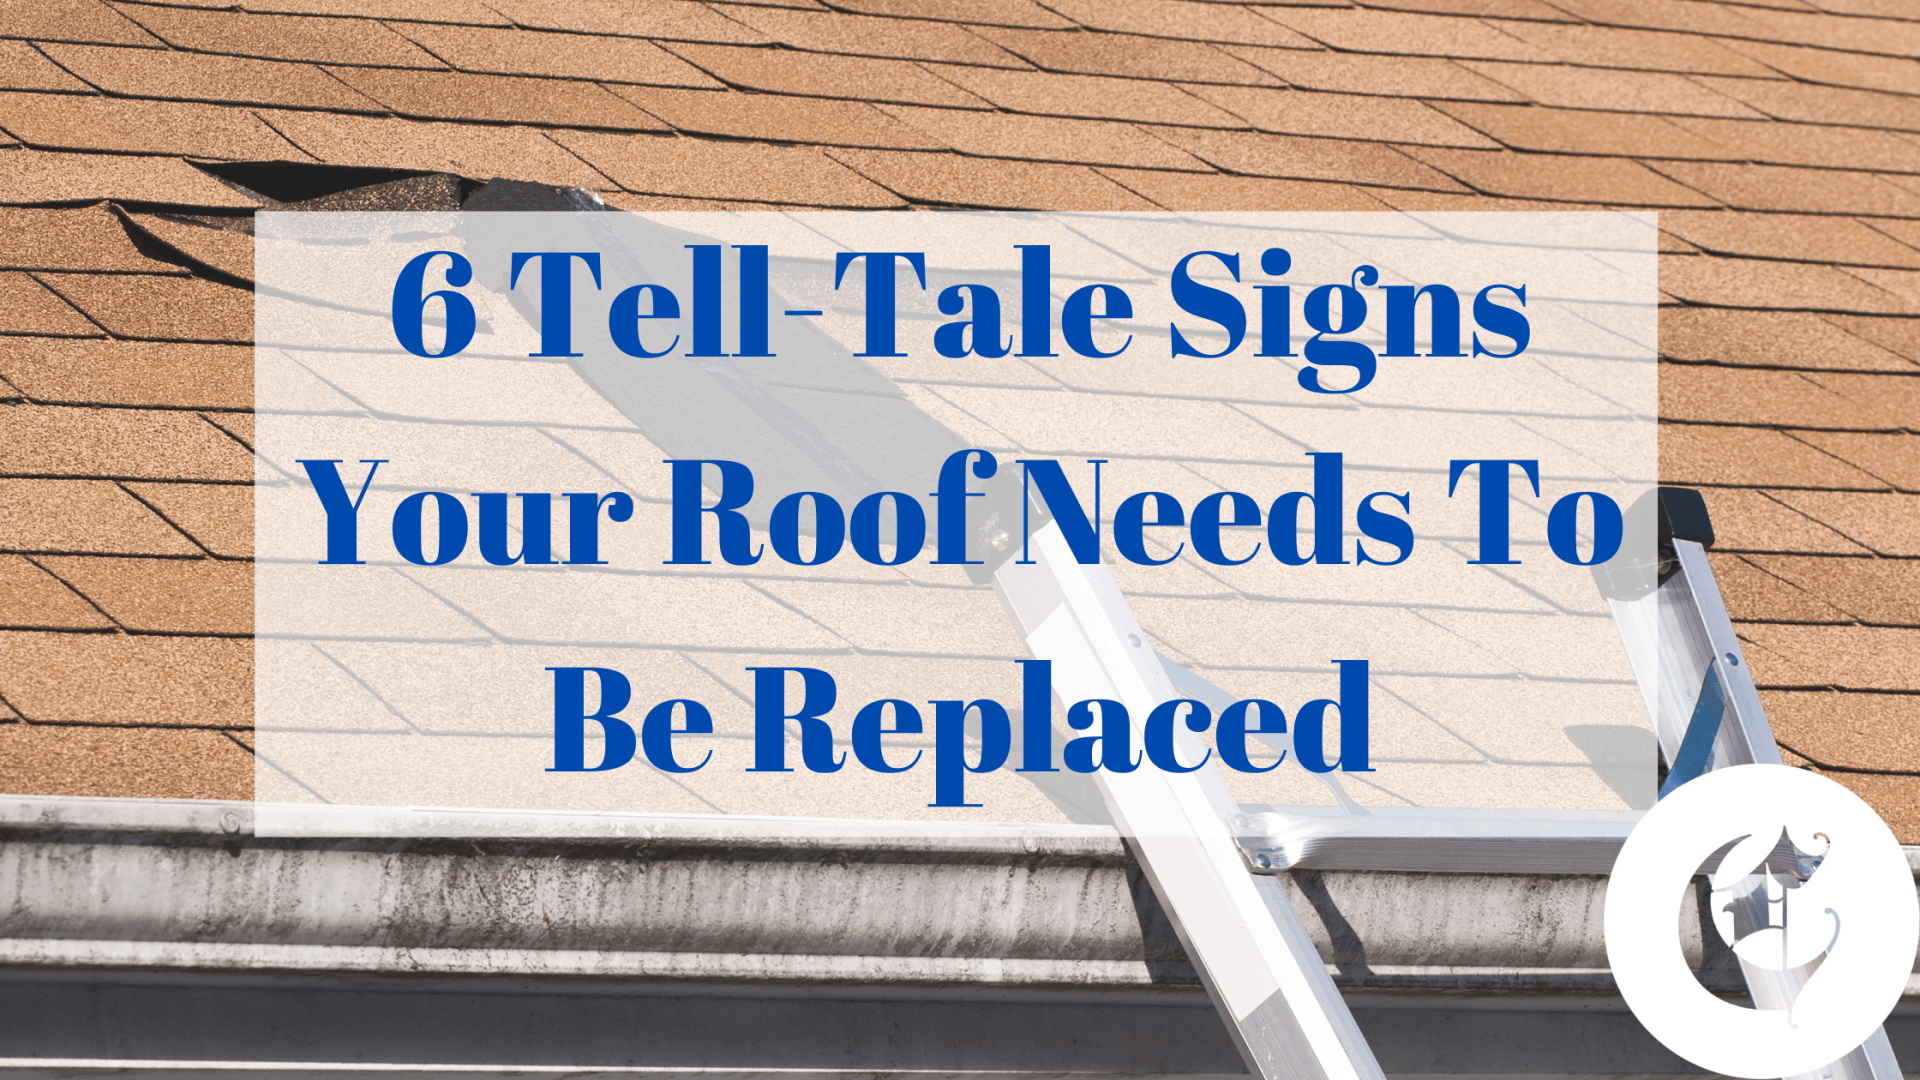 6 tell-tale signs your roof needs to be replaced, roof replacememt, roof repairs, best roofing contractor near me, sioux falls sd